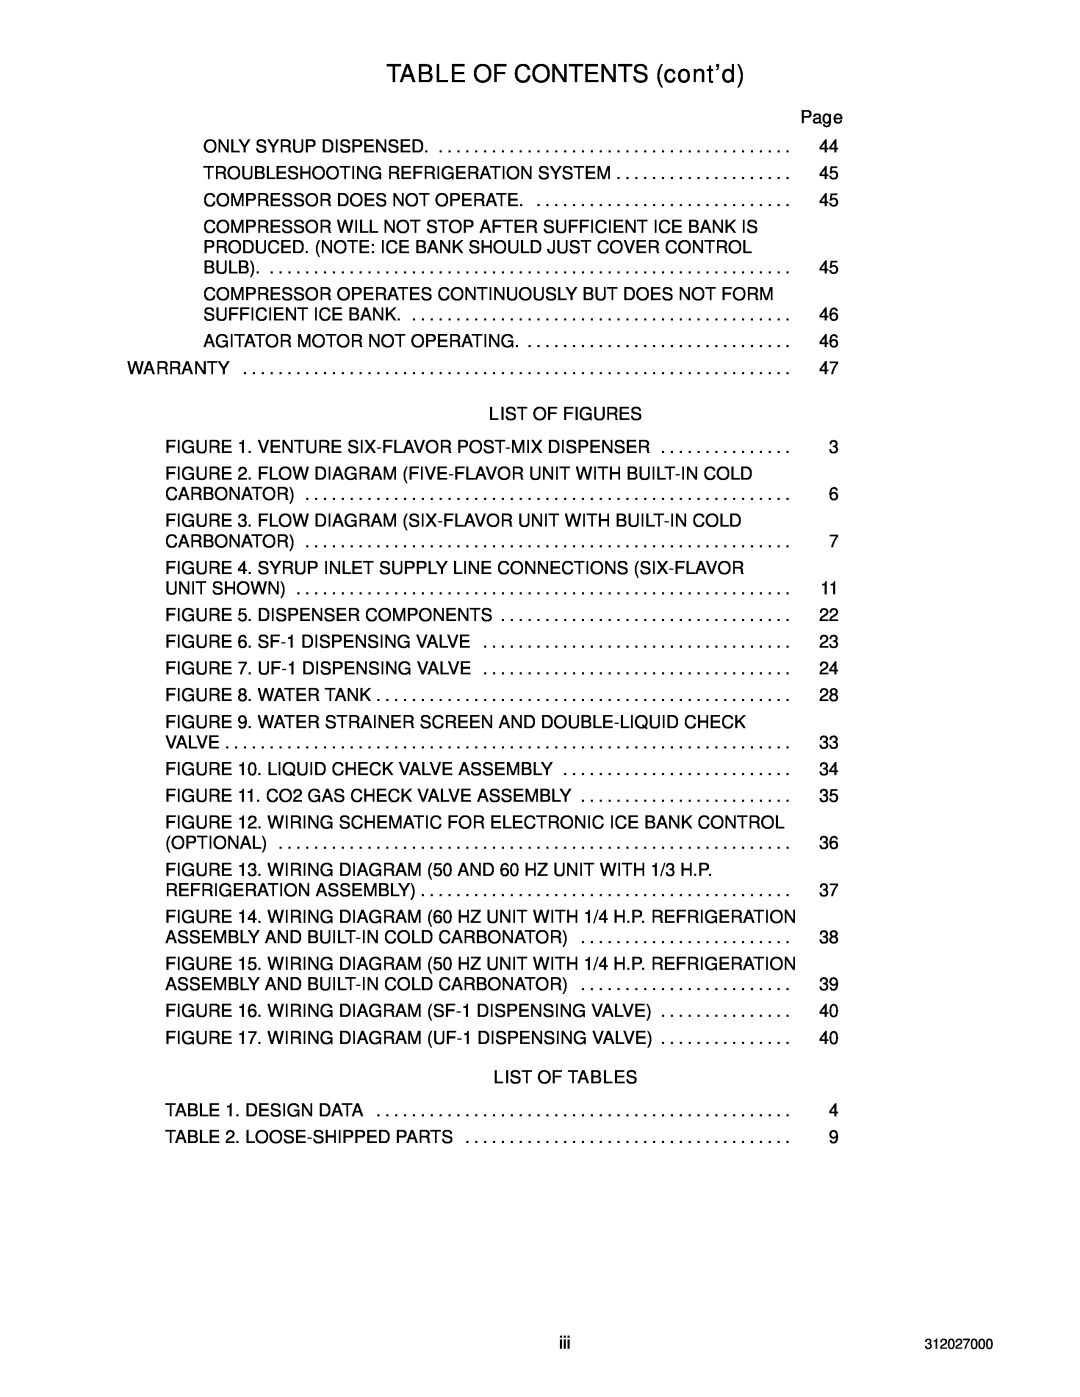 Cornelius R-134A service manual TABLE OF CONTENTS cont’d, Troubleshooting Refrigeration System 